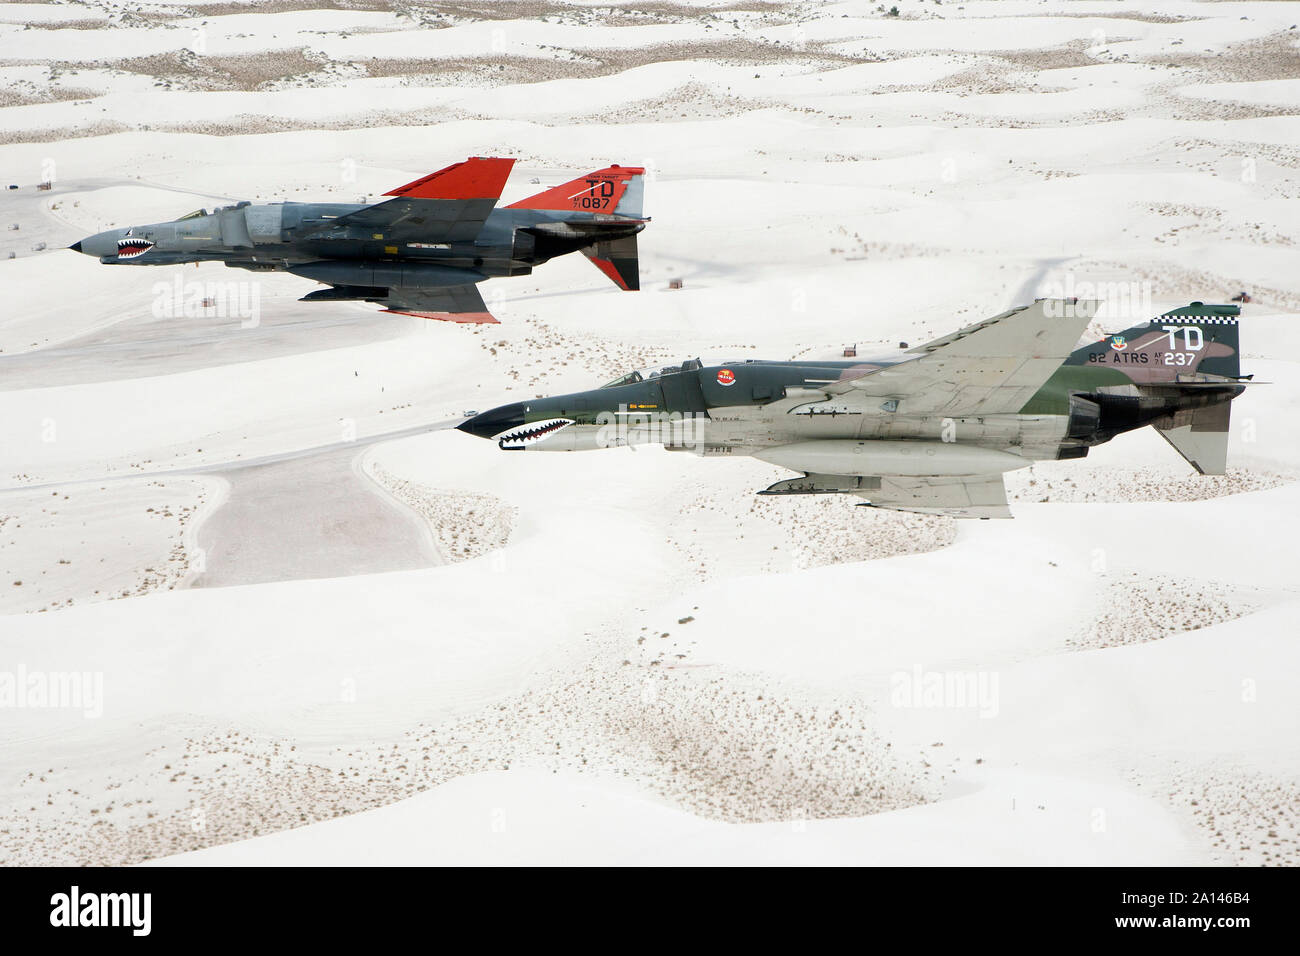 Two QF-4E Phantoms in formation over the White Sands National Monument in New Mexico. Stock Photo